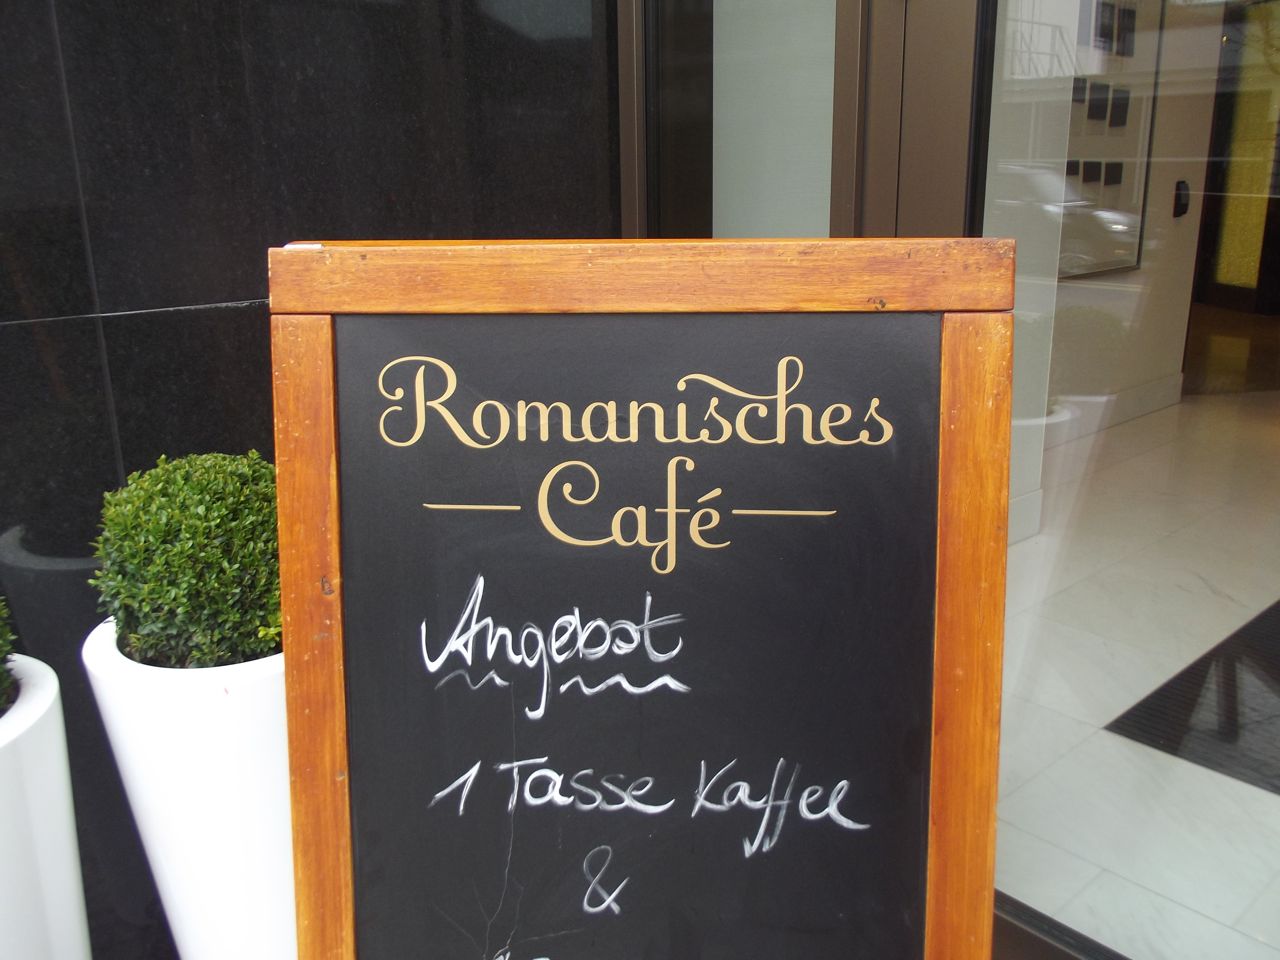 <!--:en-->Cafe and Cake at Waldorf Astoria’s “Romanisches Cafe”<!--:-->